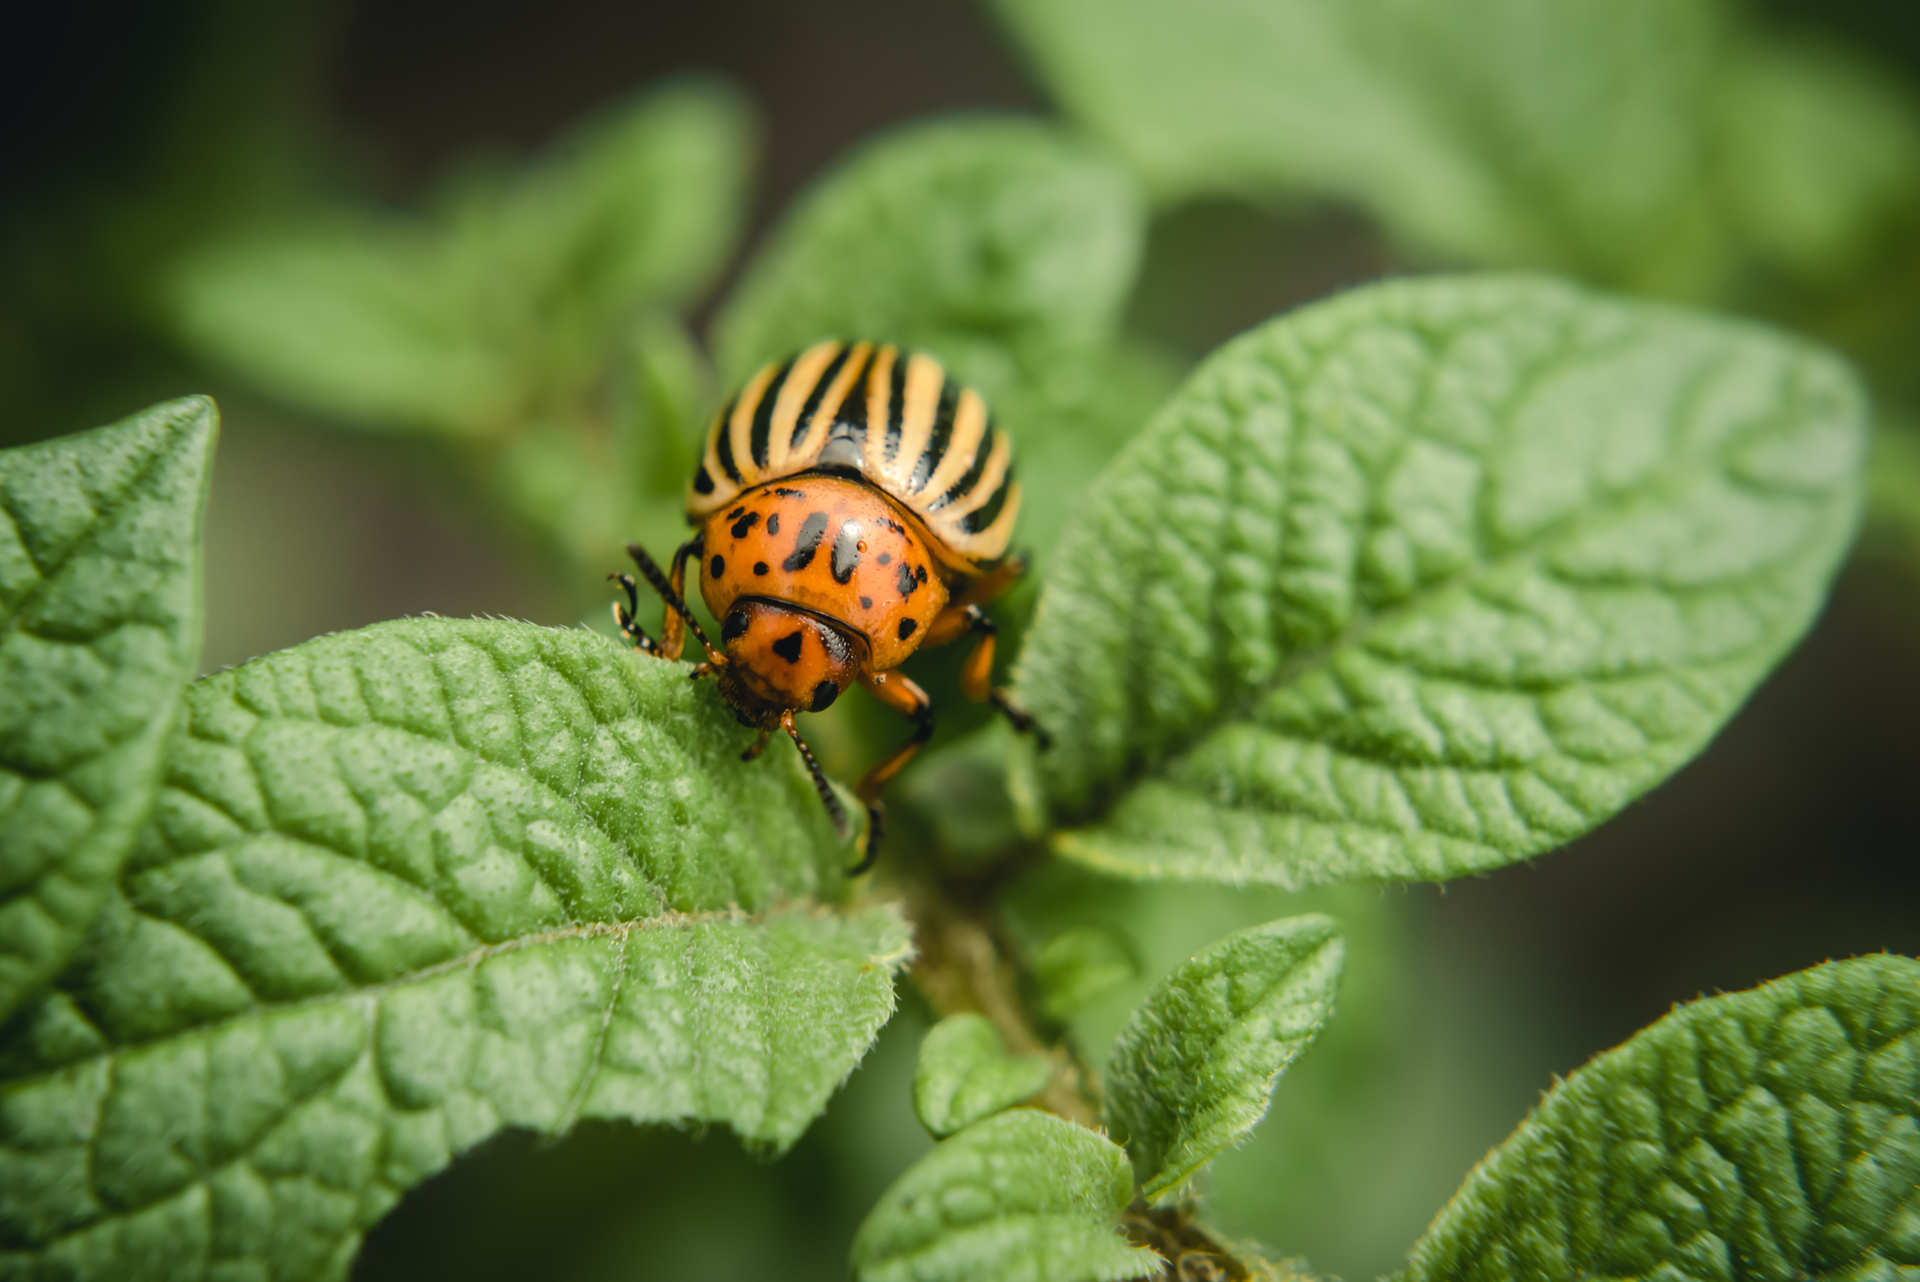 Colorado potato beetle eats potato leaves potatoes in the garden. Pests and parasites destroy crops in agriculture